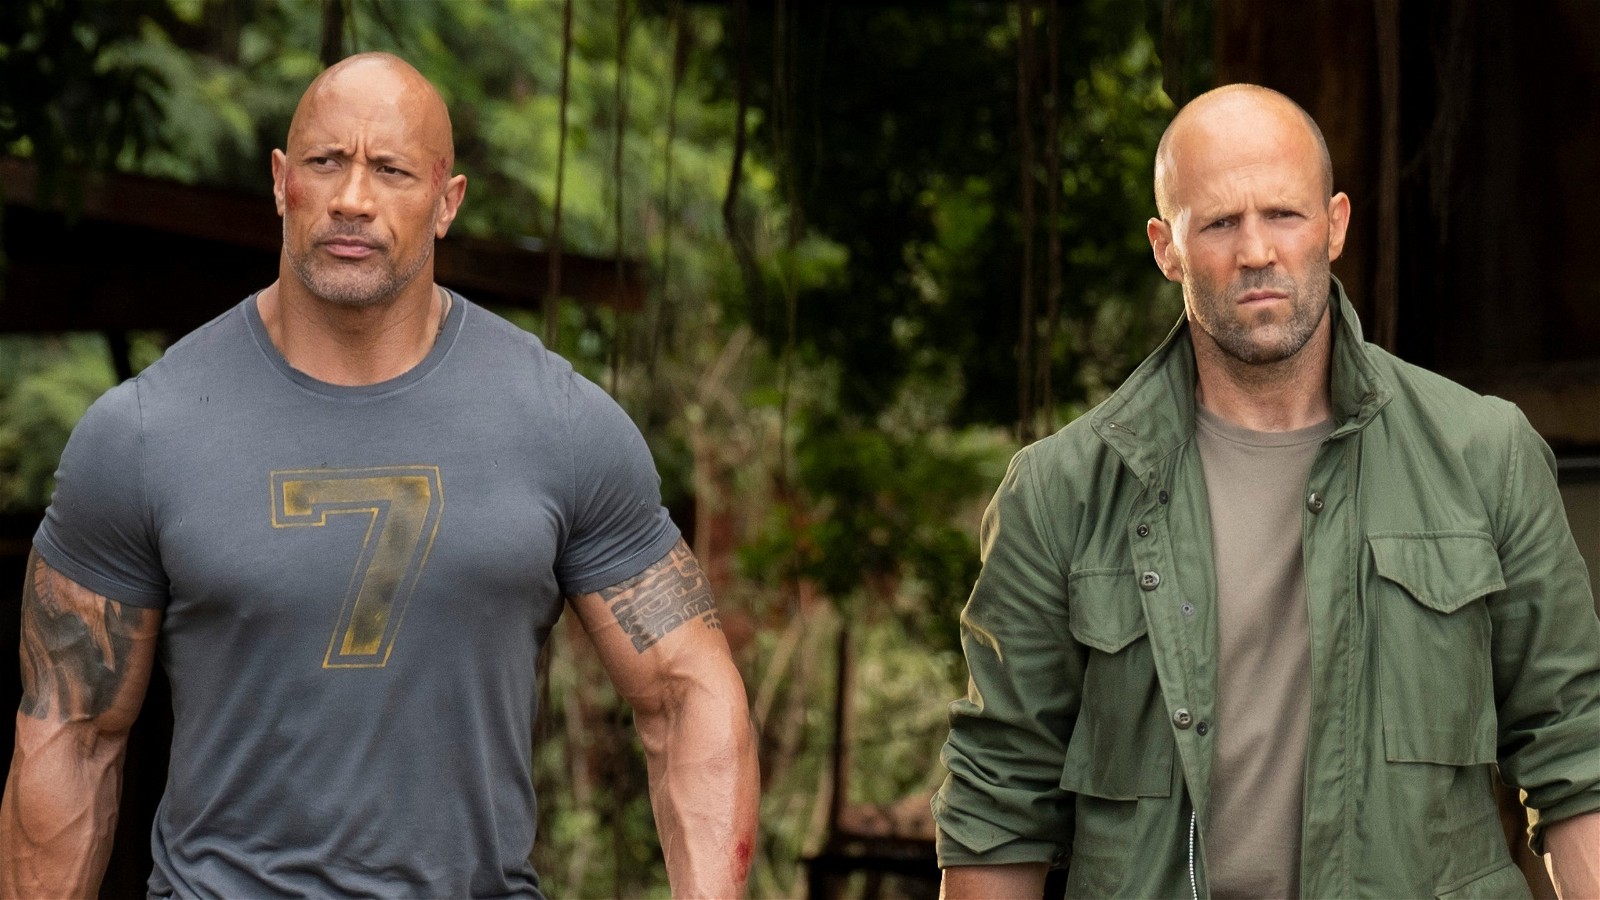 Film slike Hobbs and Shaw have been major box office hits for the studio